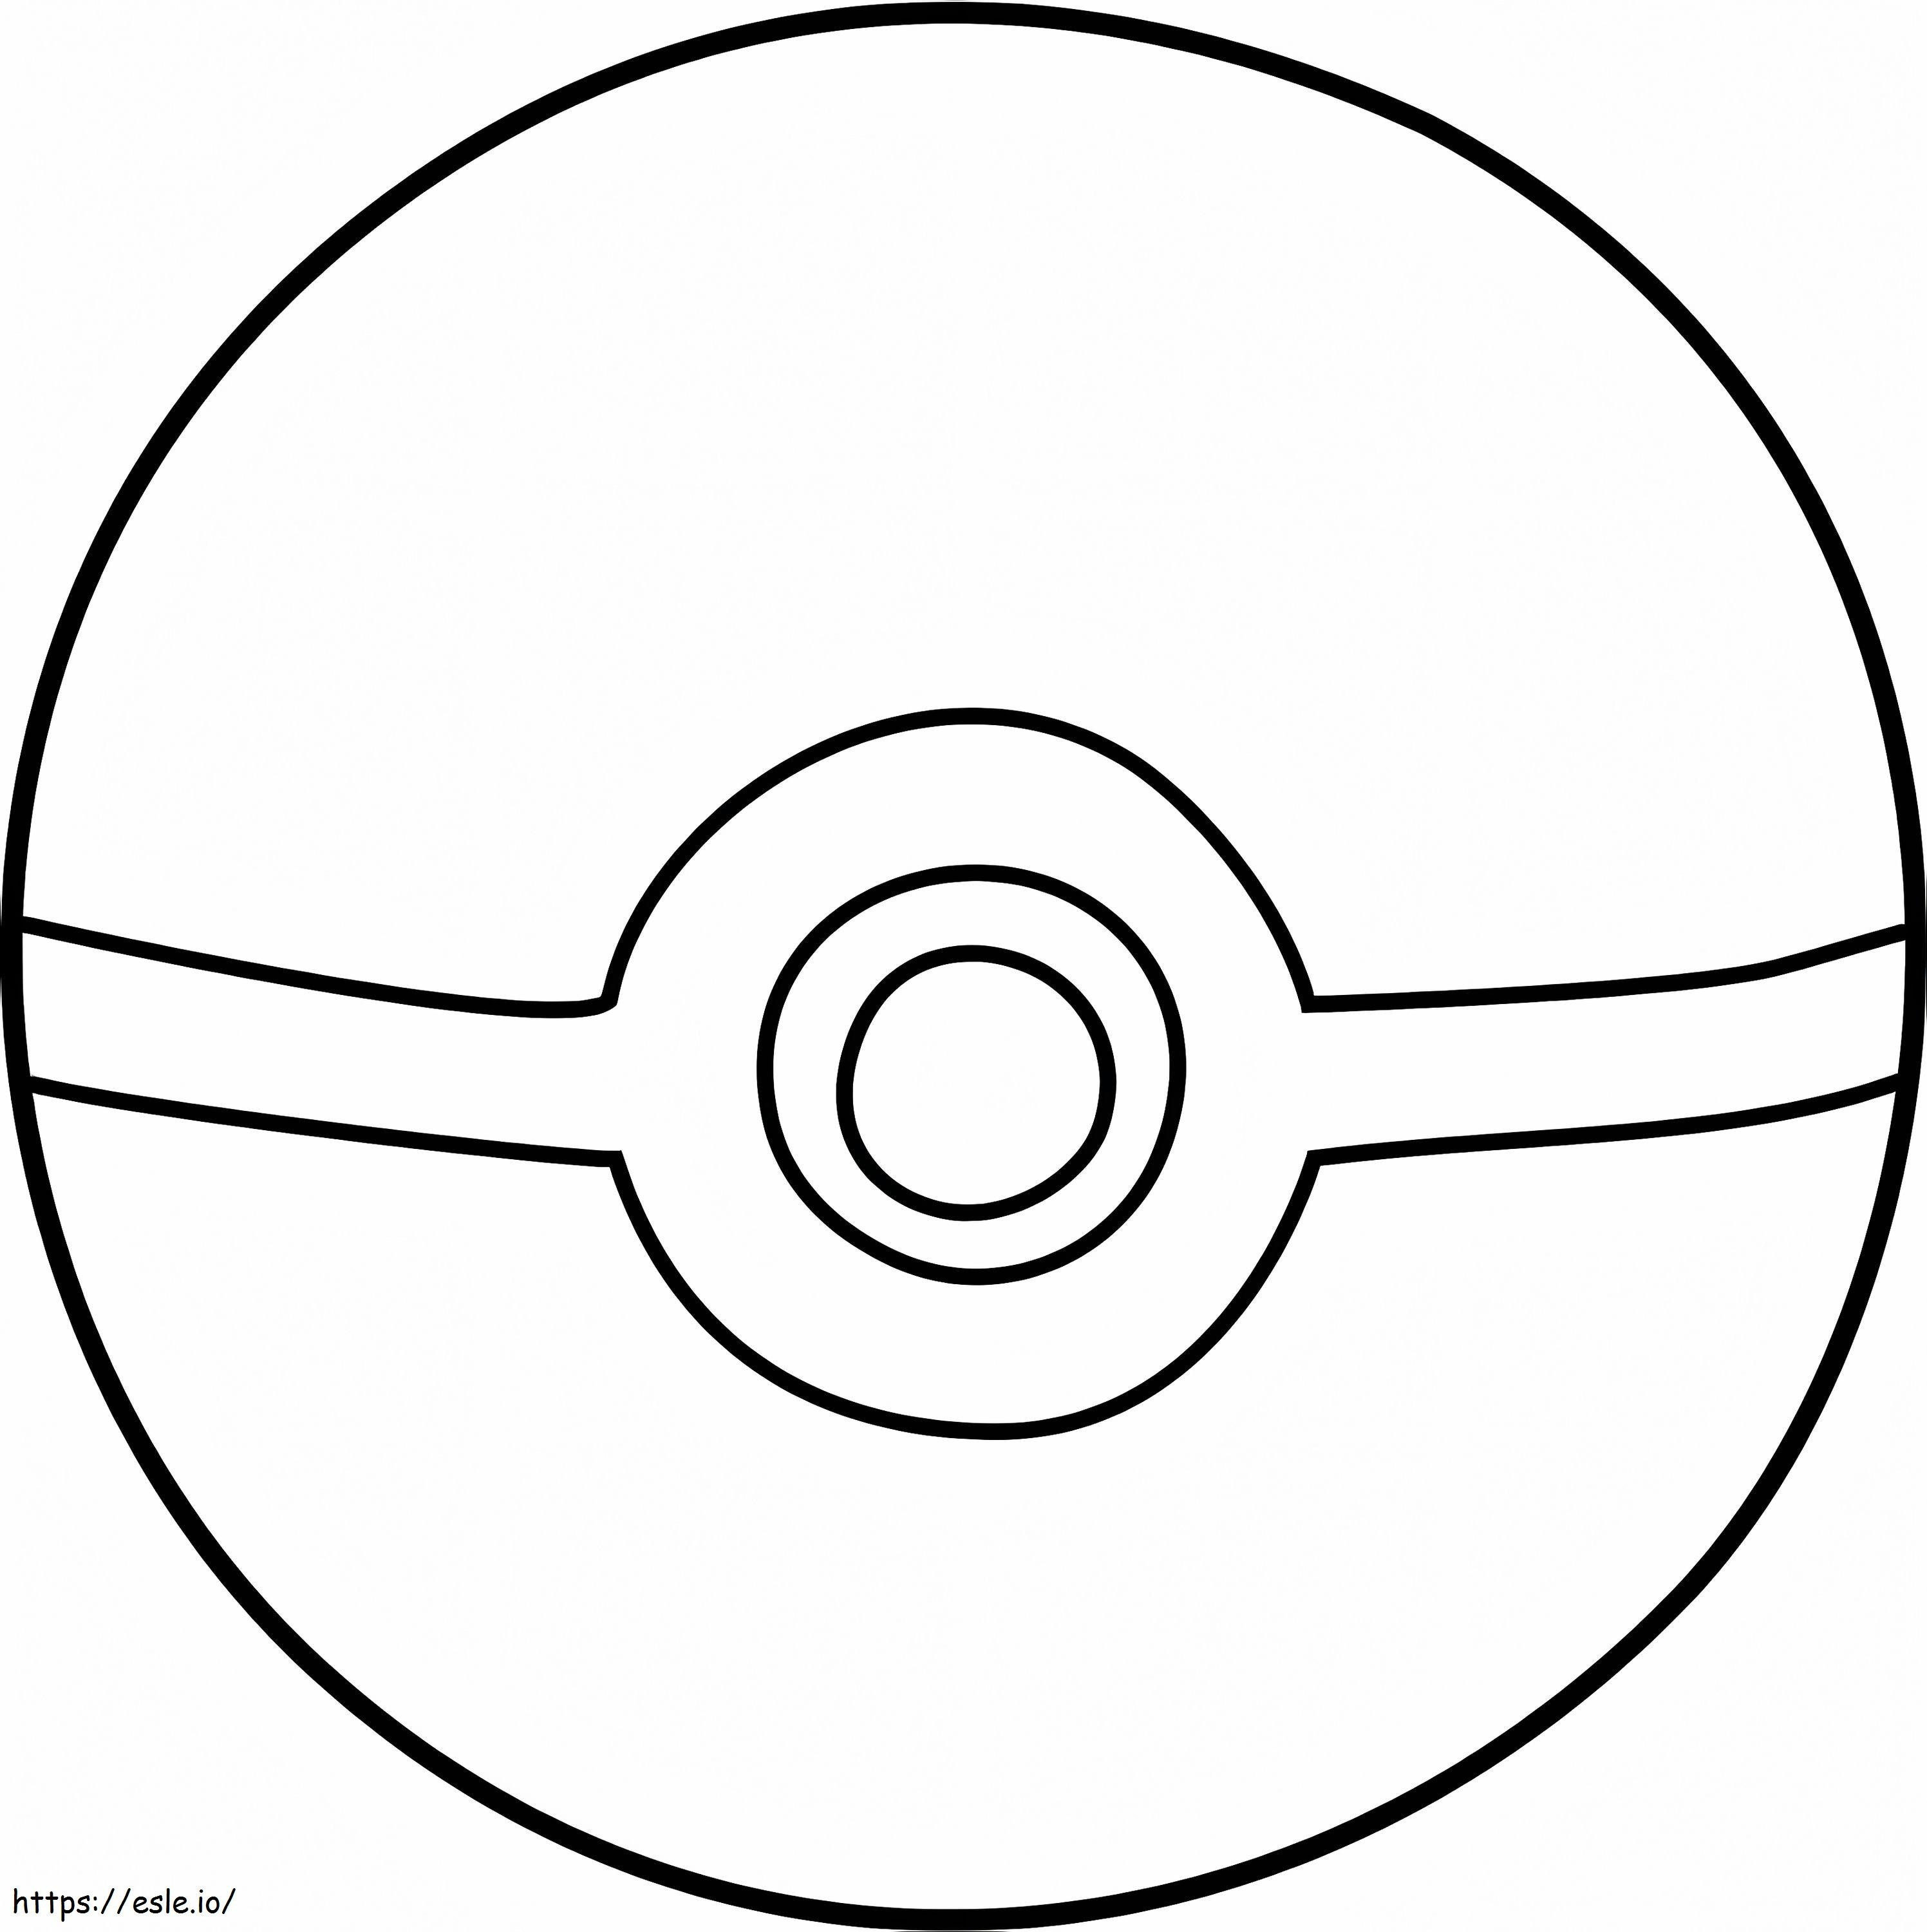 A Pokeball coloring page